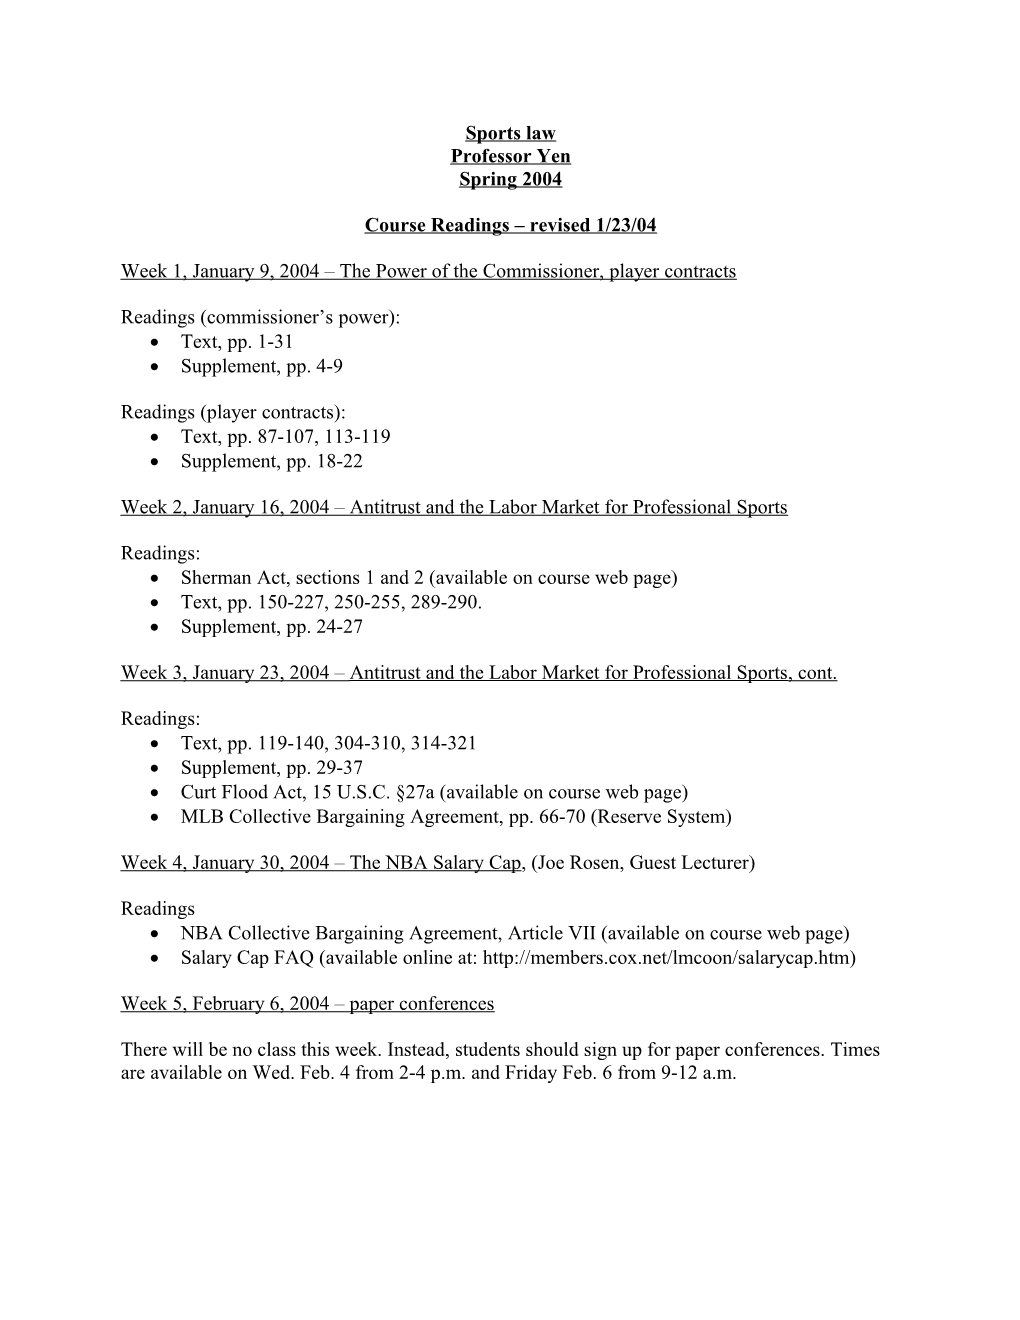 Course Readings Revised 1/23/04